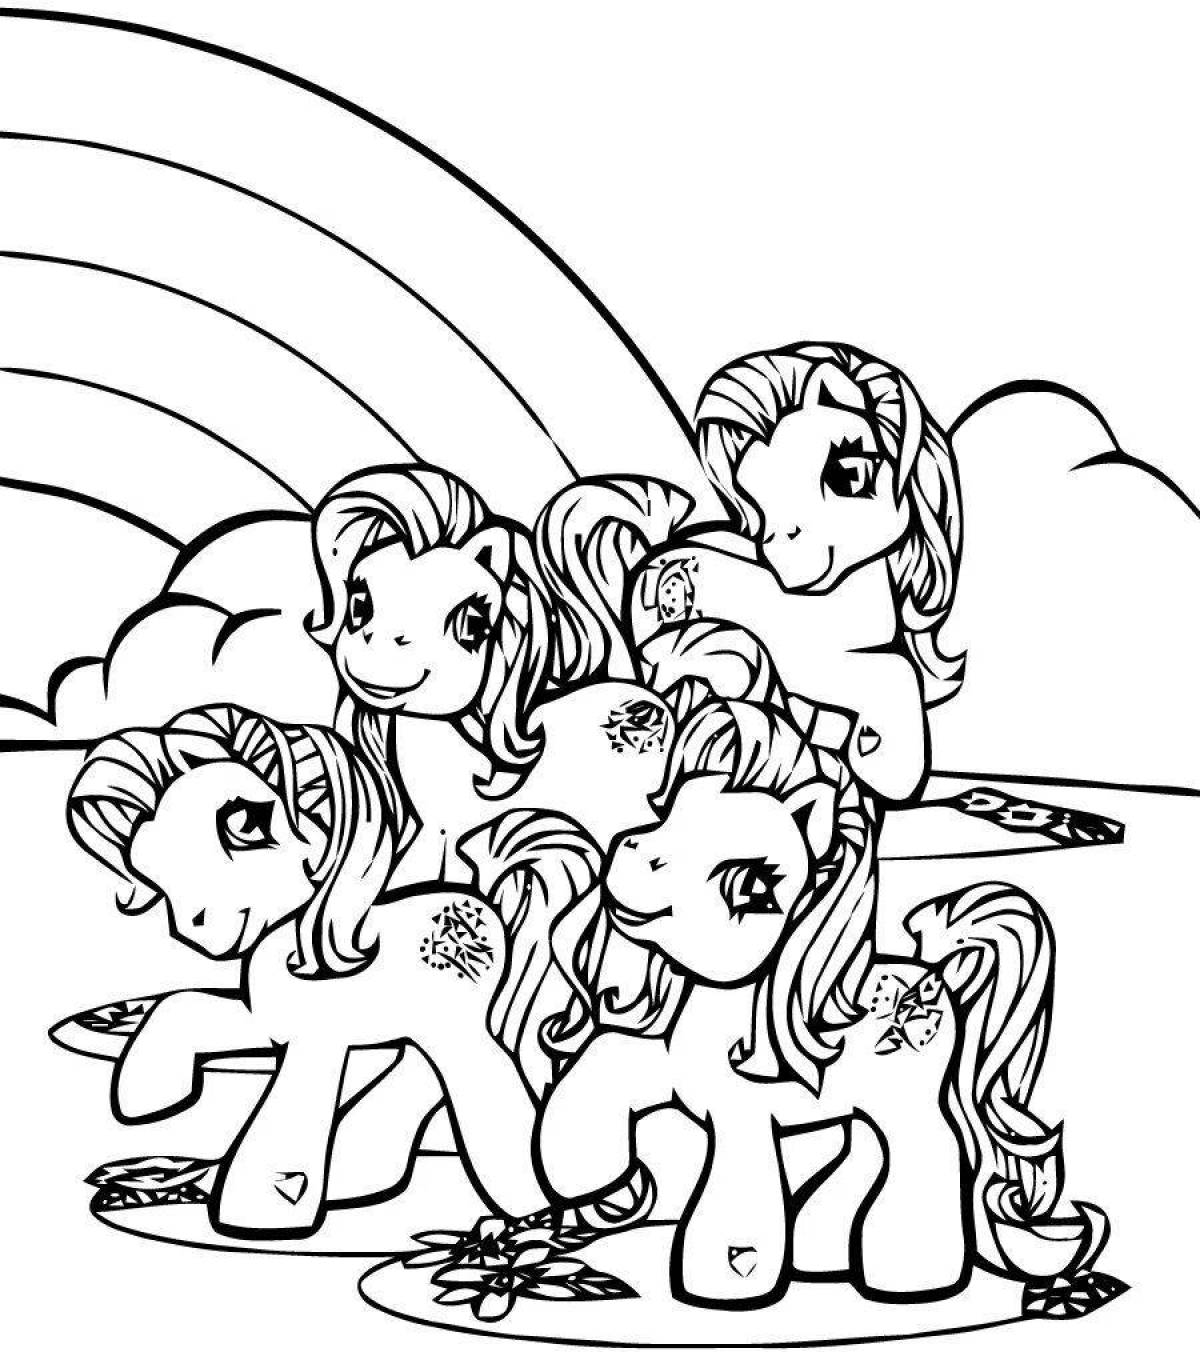 Cheering rainbow friends coloring page